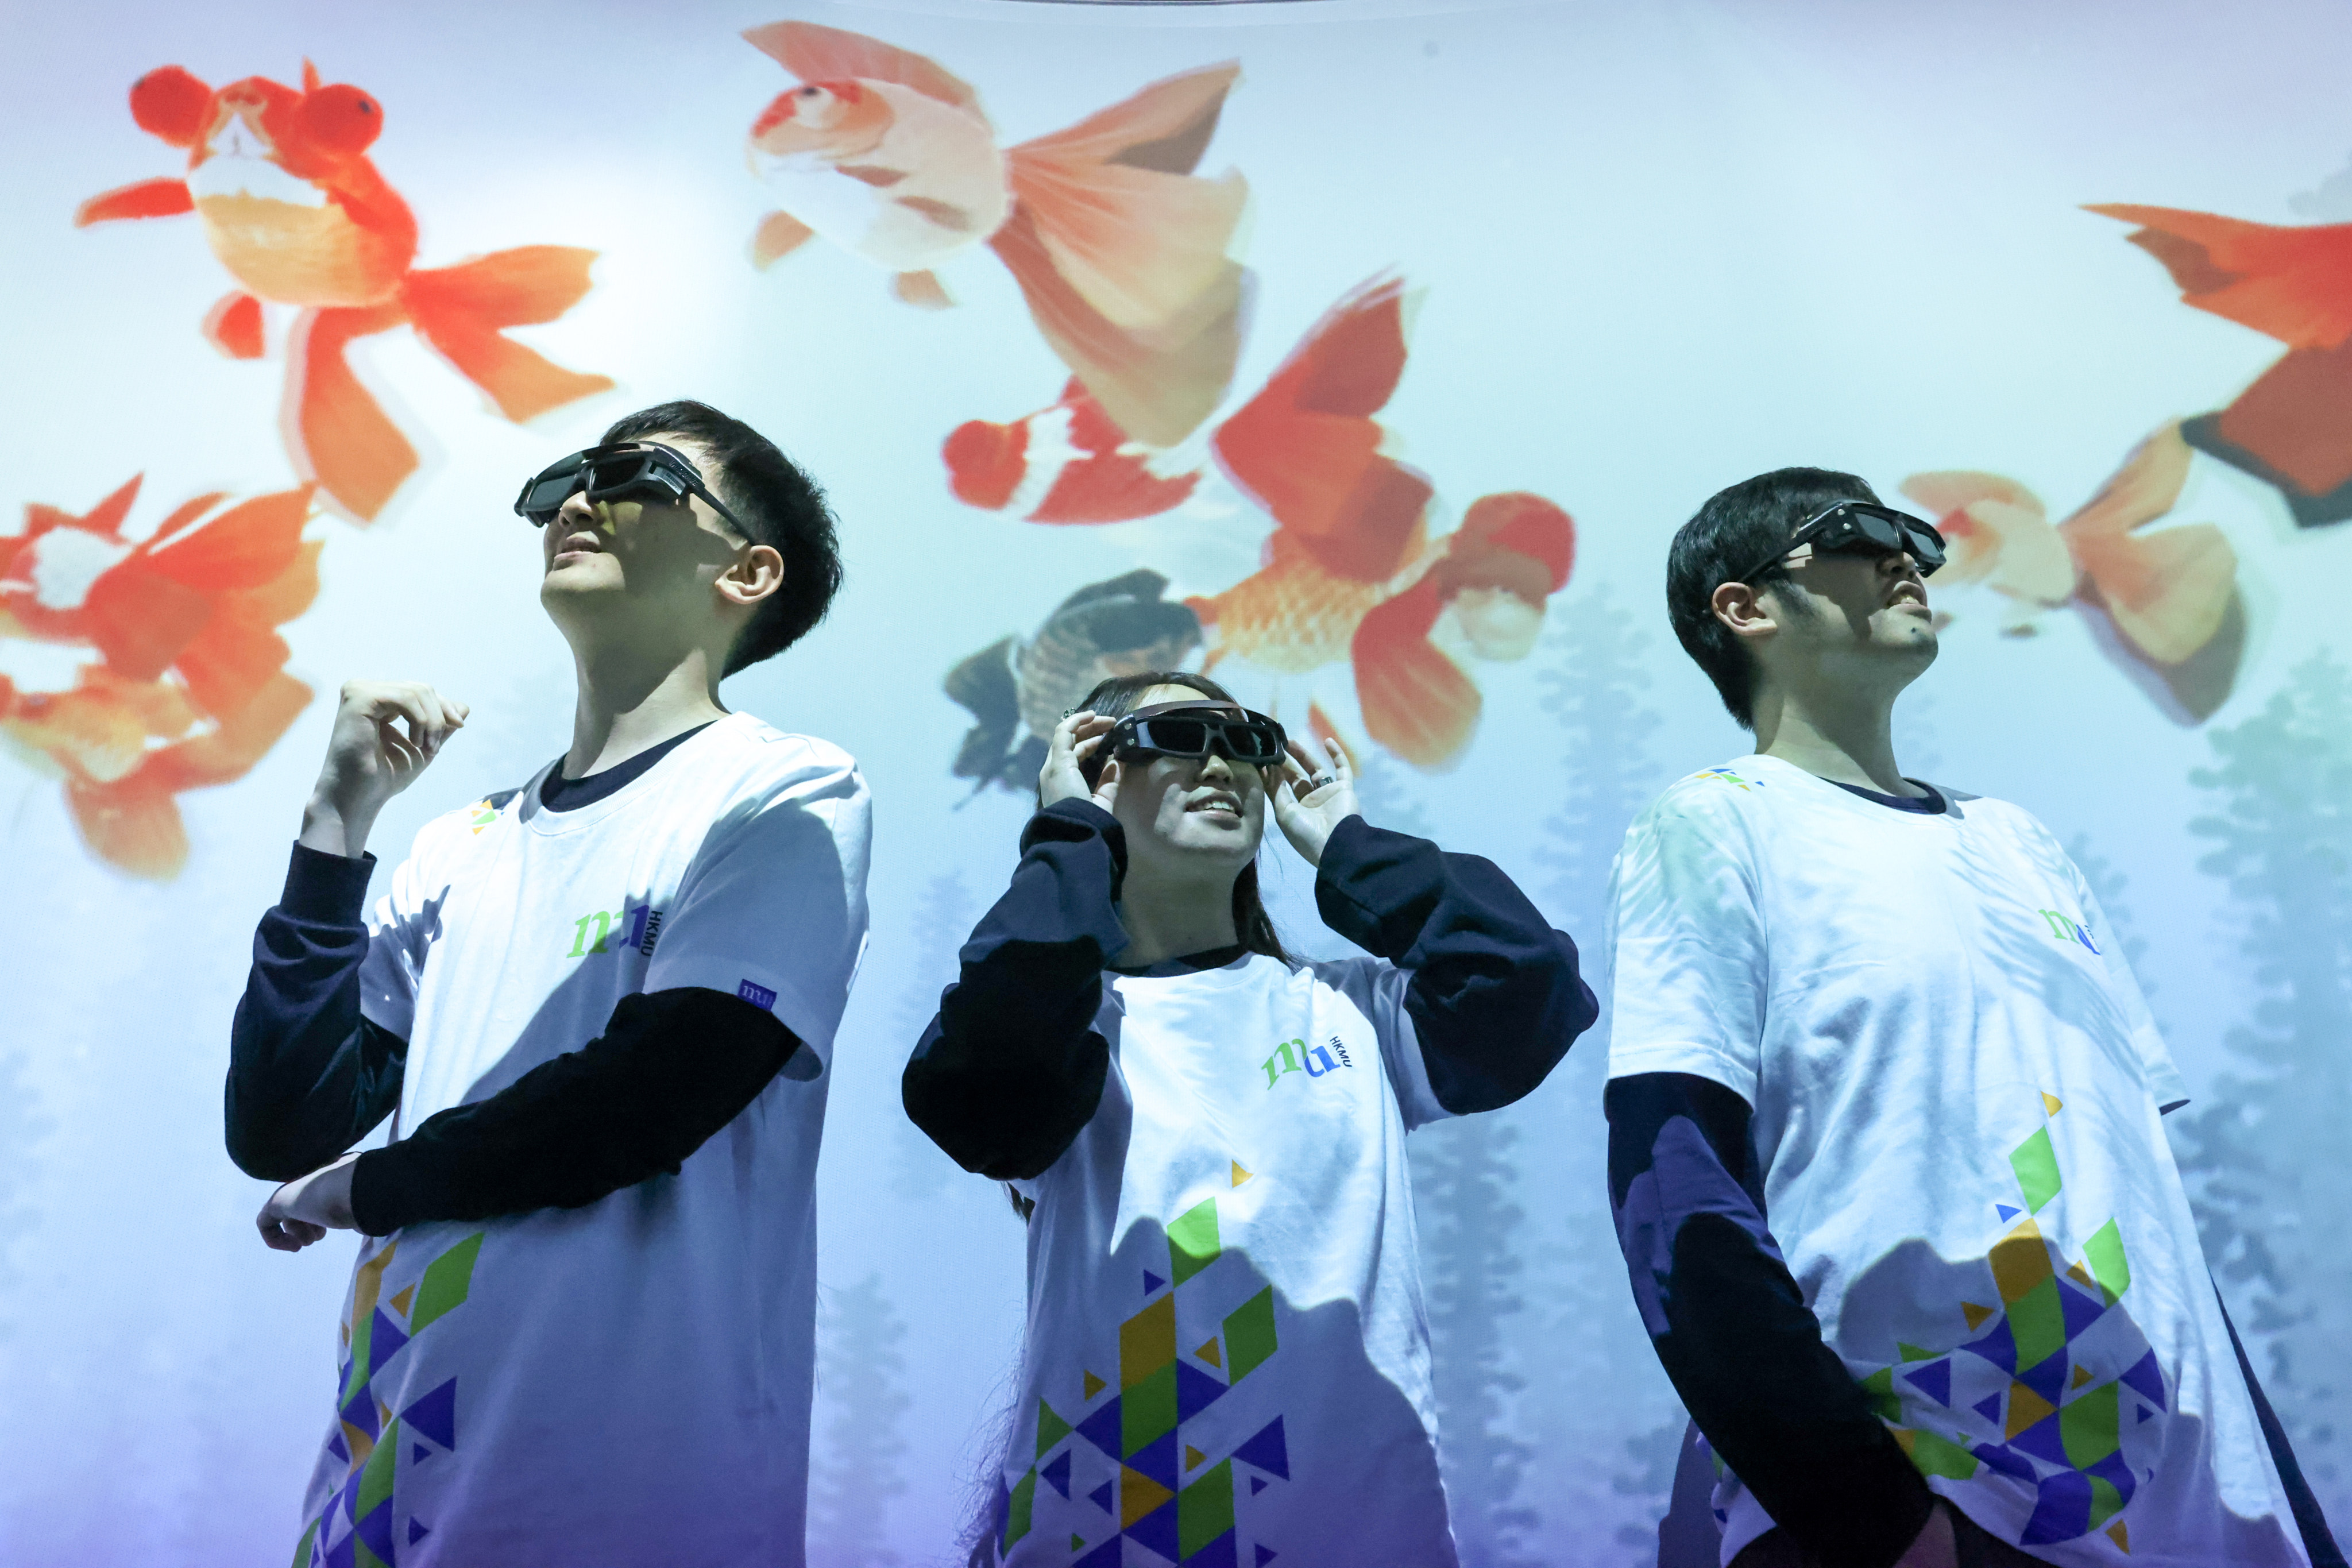 Creative arts undergraduates pose with their project, “Goldfish”, at an exhibition at the Hong Kong Metropolitan University’s Digital Art Laboratory on January 9. Photo: K.Y. Cheng